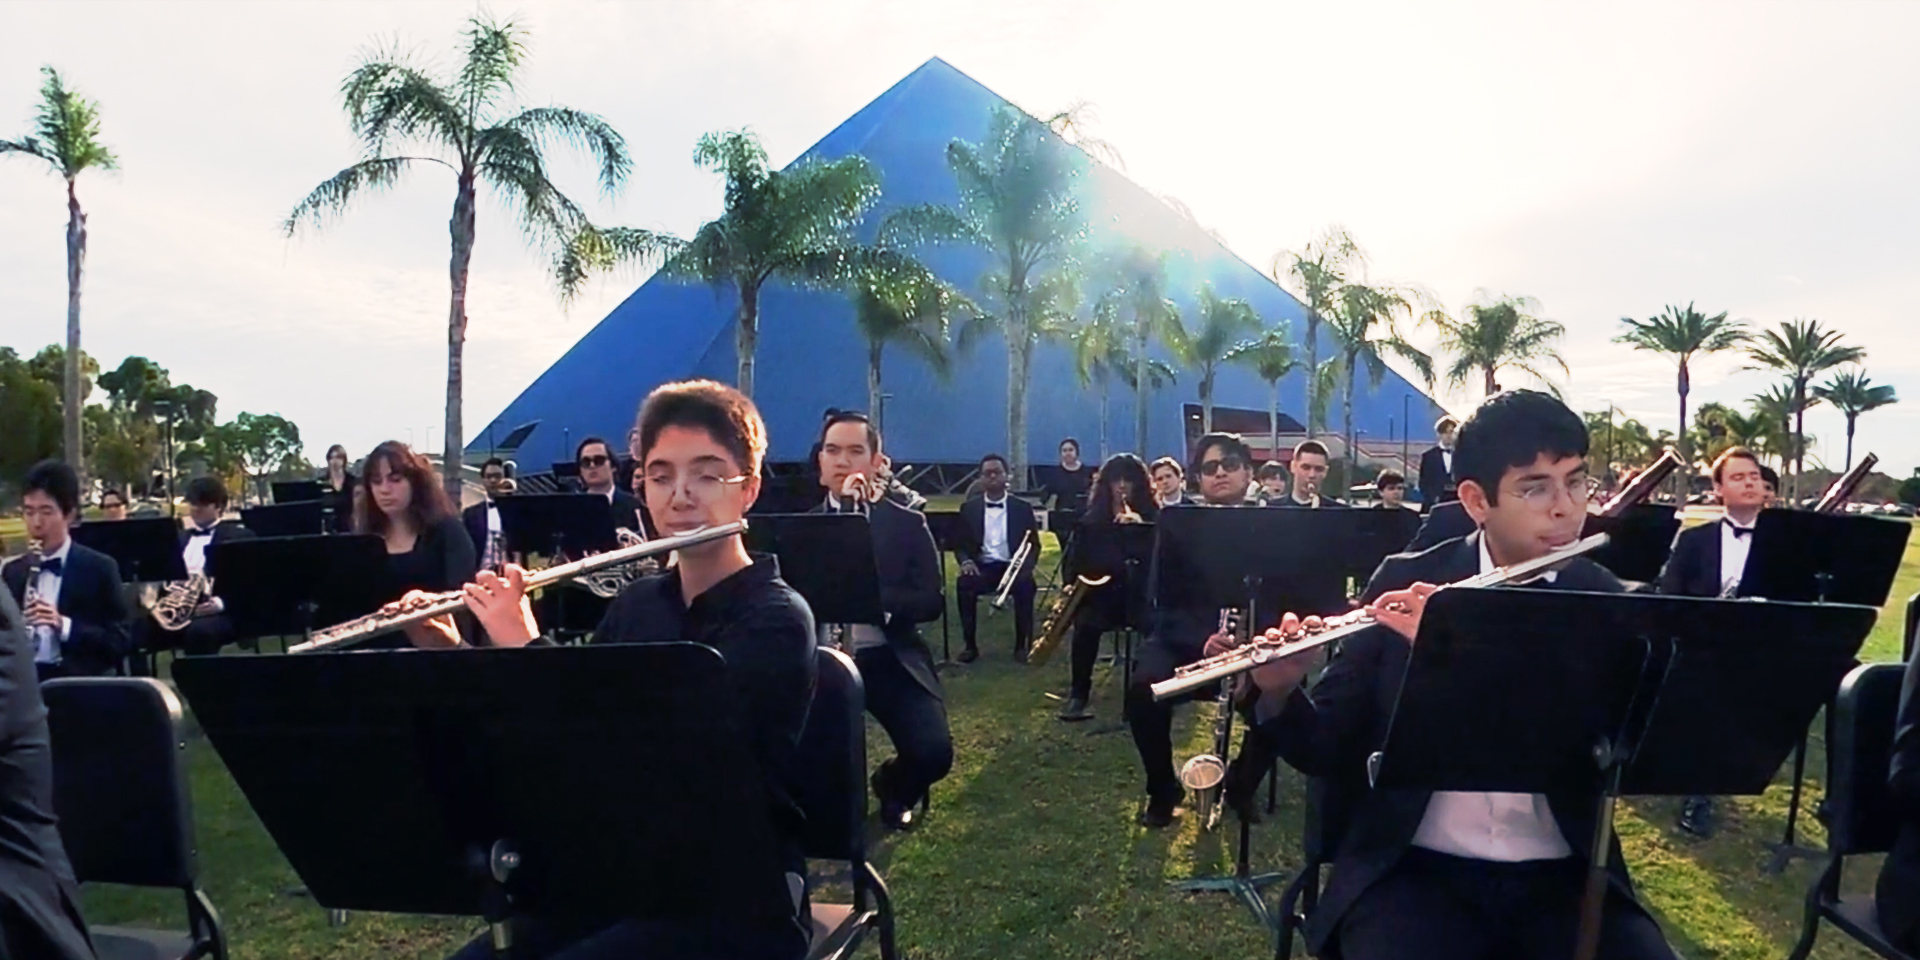 Bob Cole Conservatory Wind Symphony outside on the lawn in front of the Pyramid.